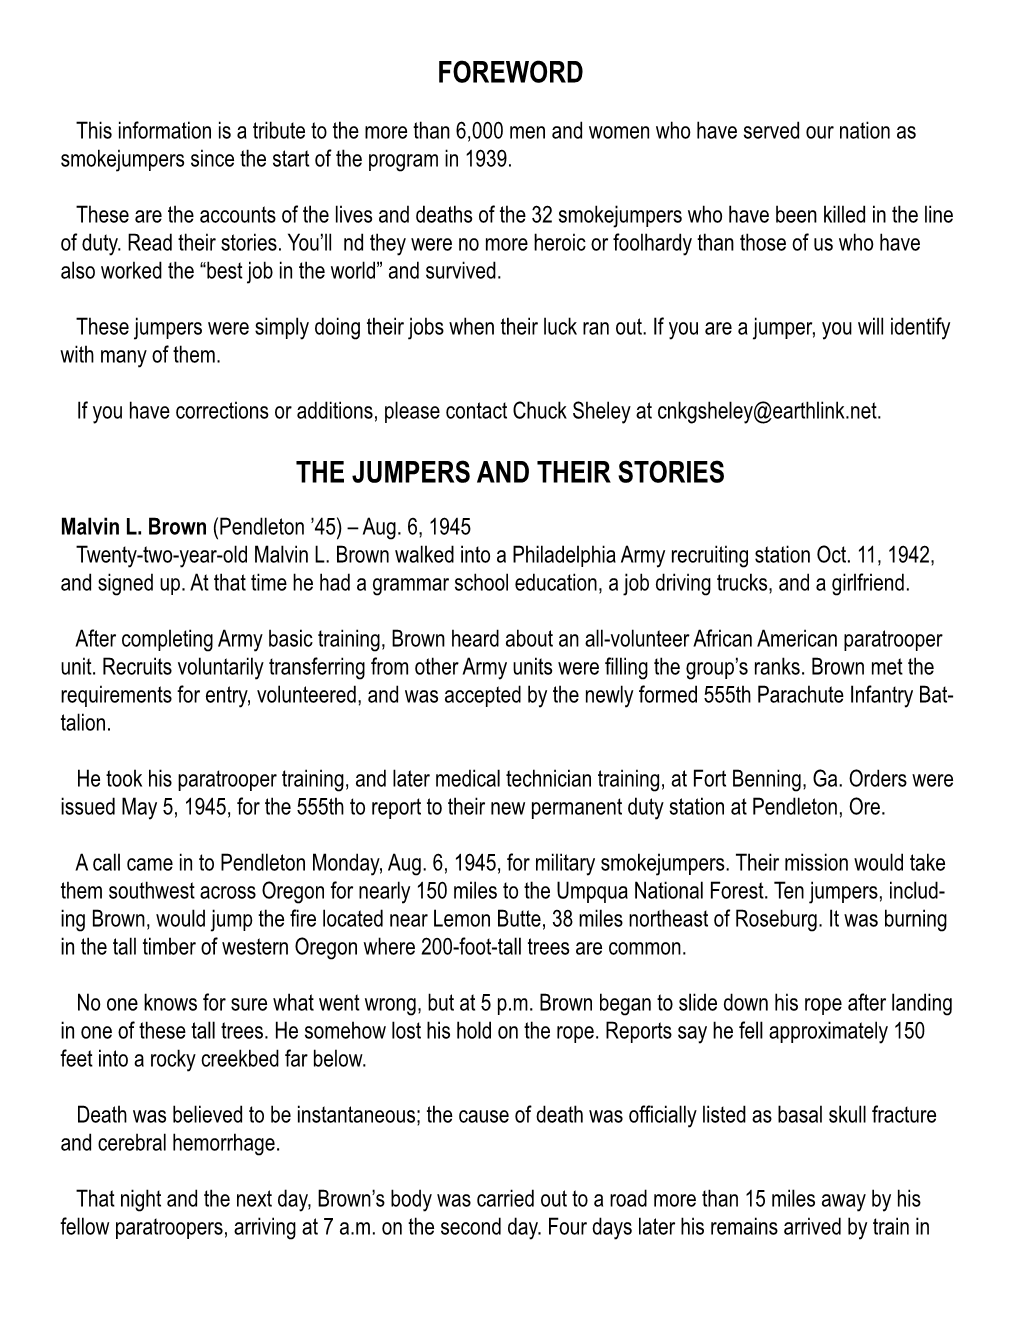 Foreword the Jumpers and Their Stories